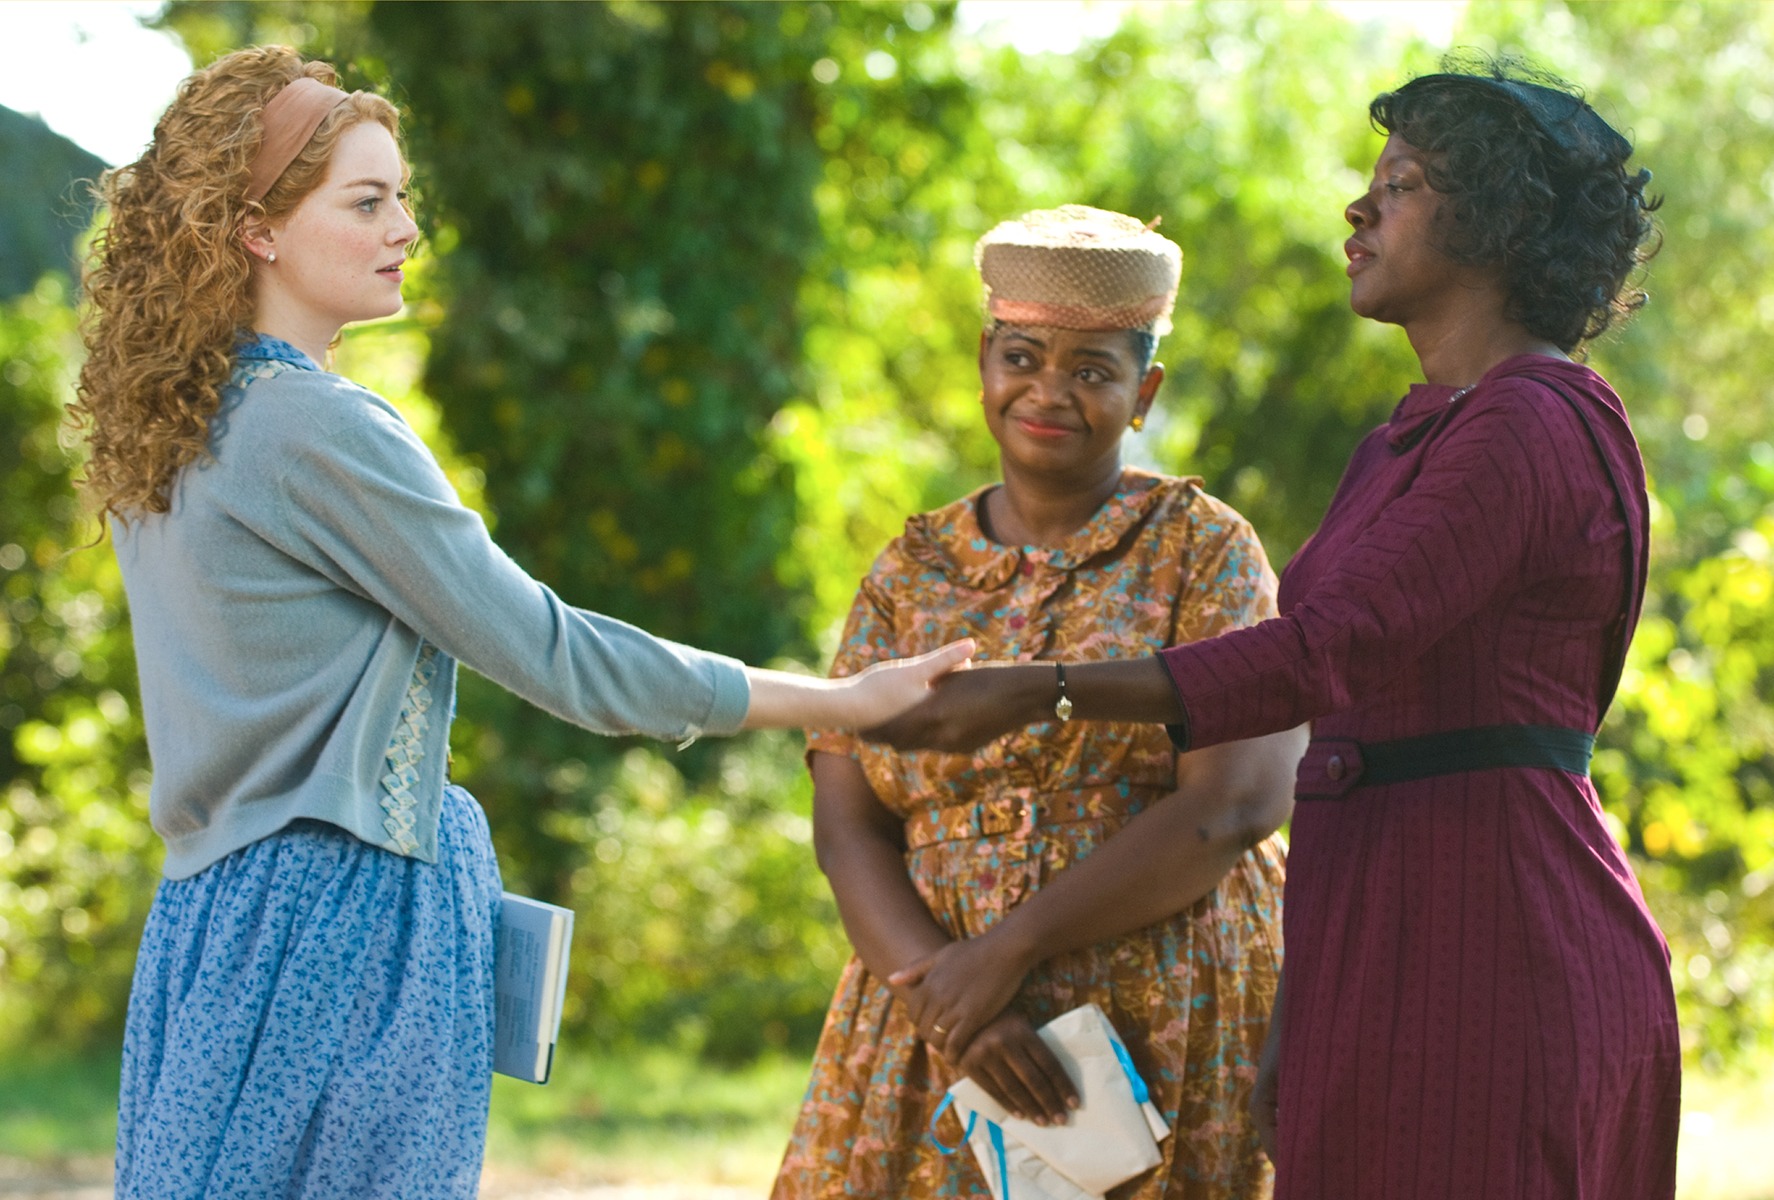 Viola Davis and Emma Stone, holding both hands together, while Octavia Spencer smiles in the background